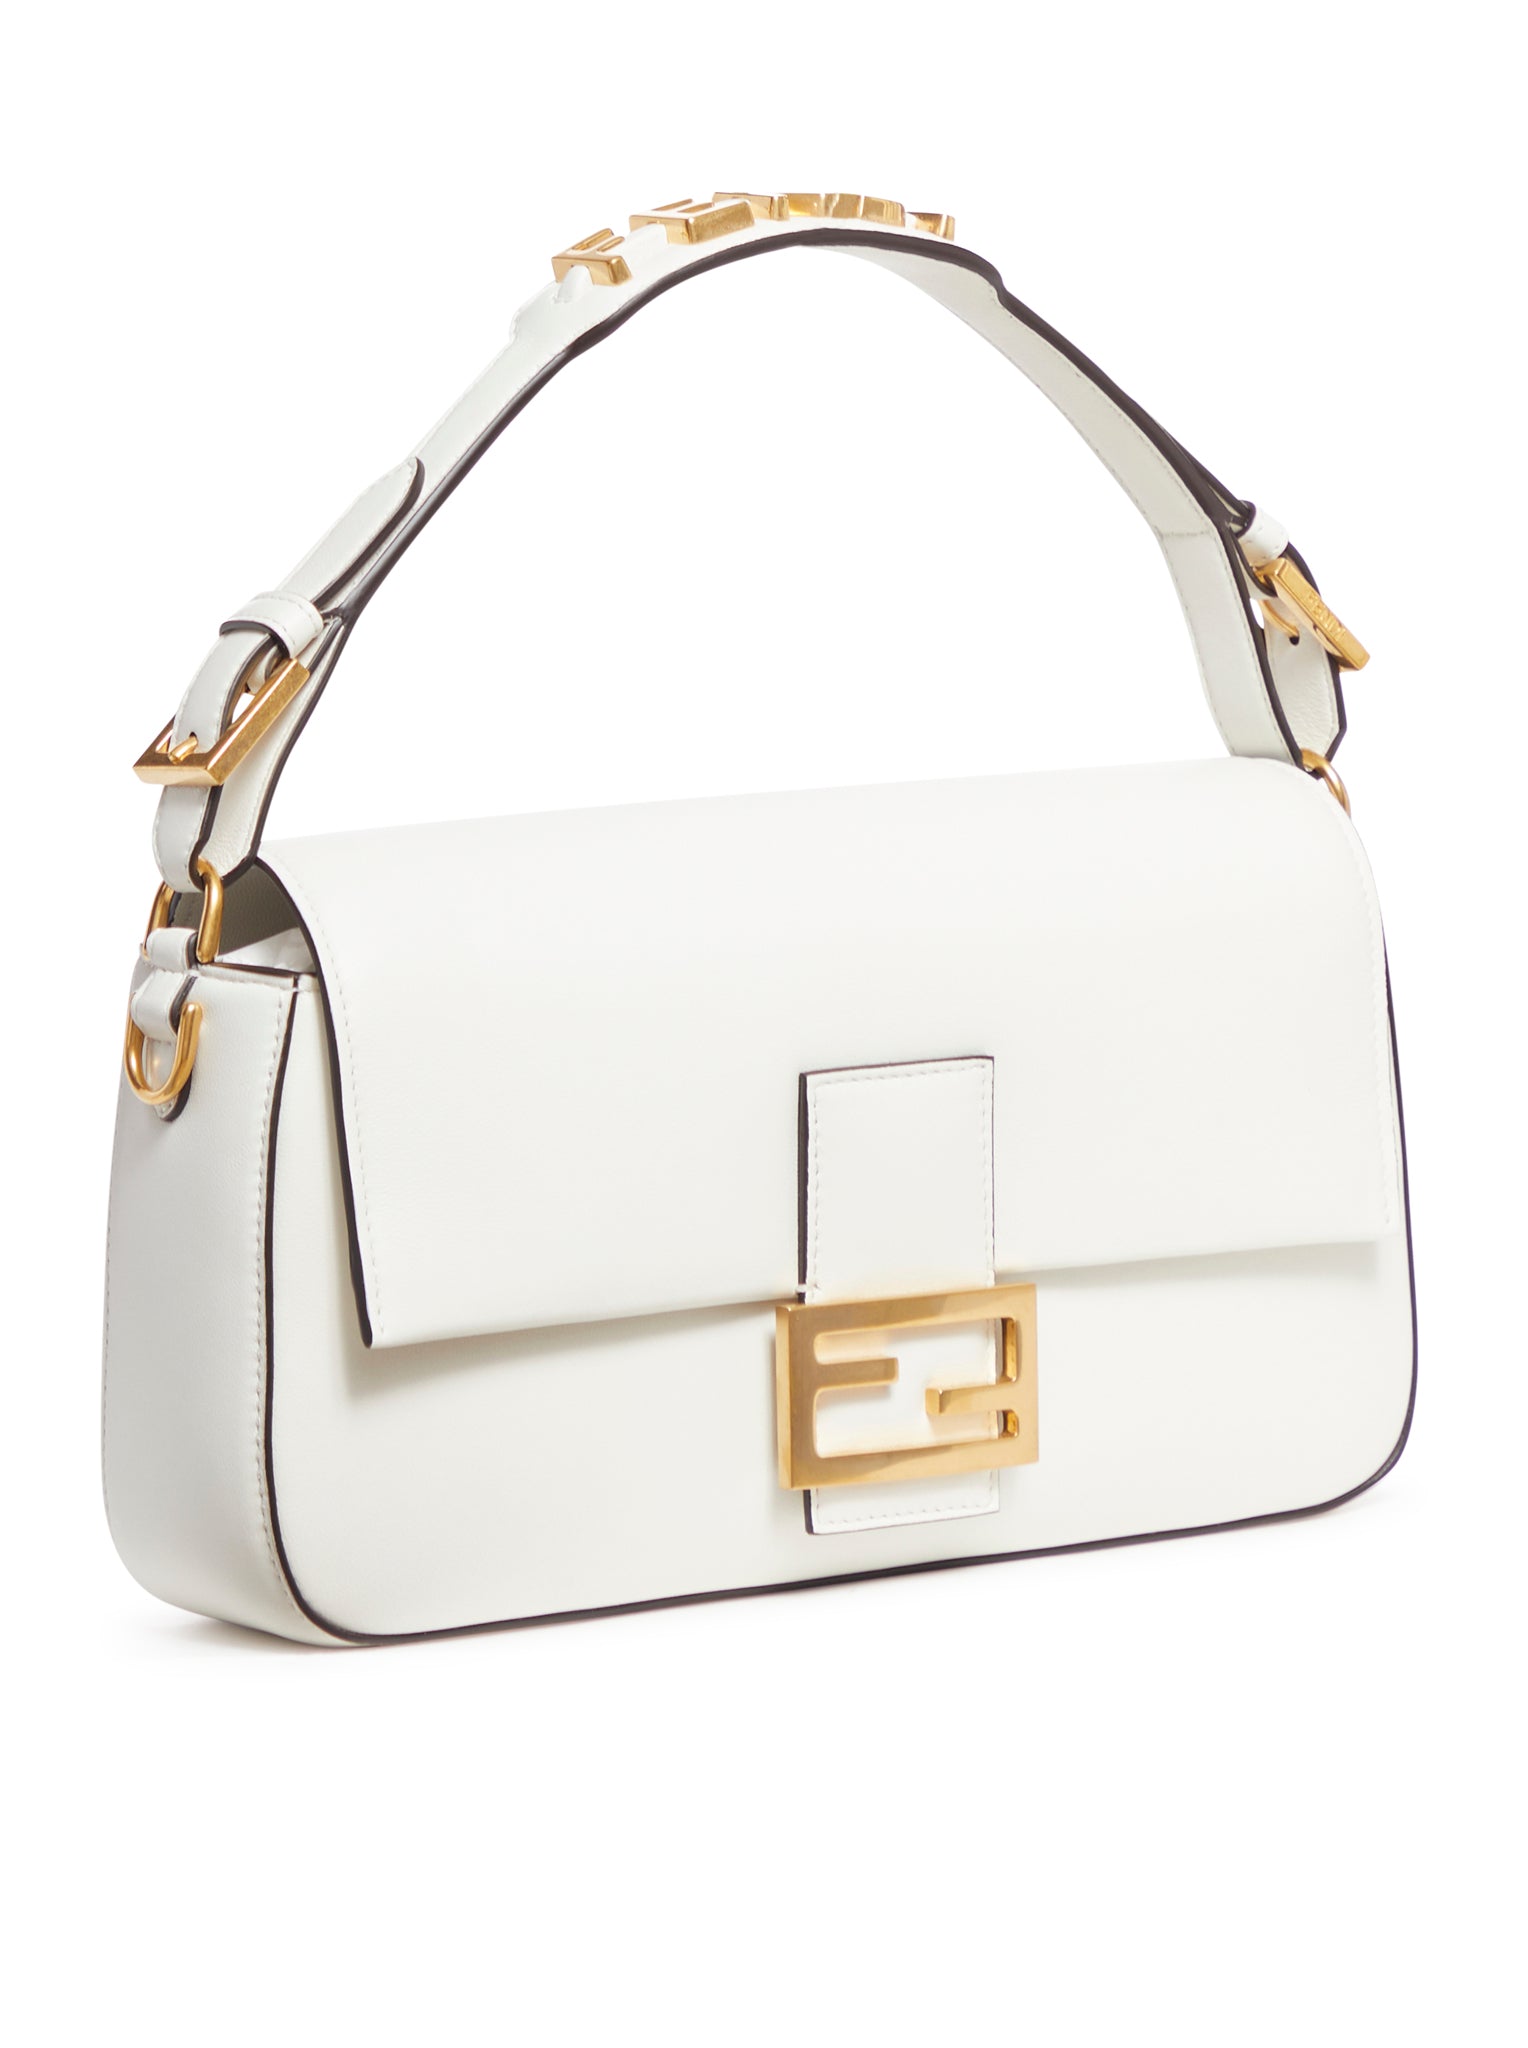 WHITE LEATHER BAGUETTE BAG